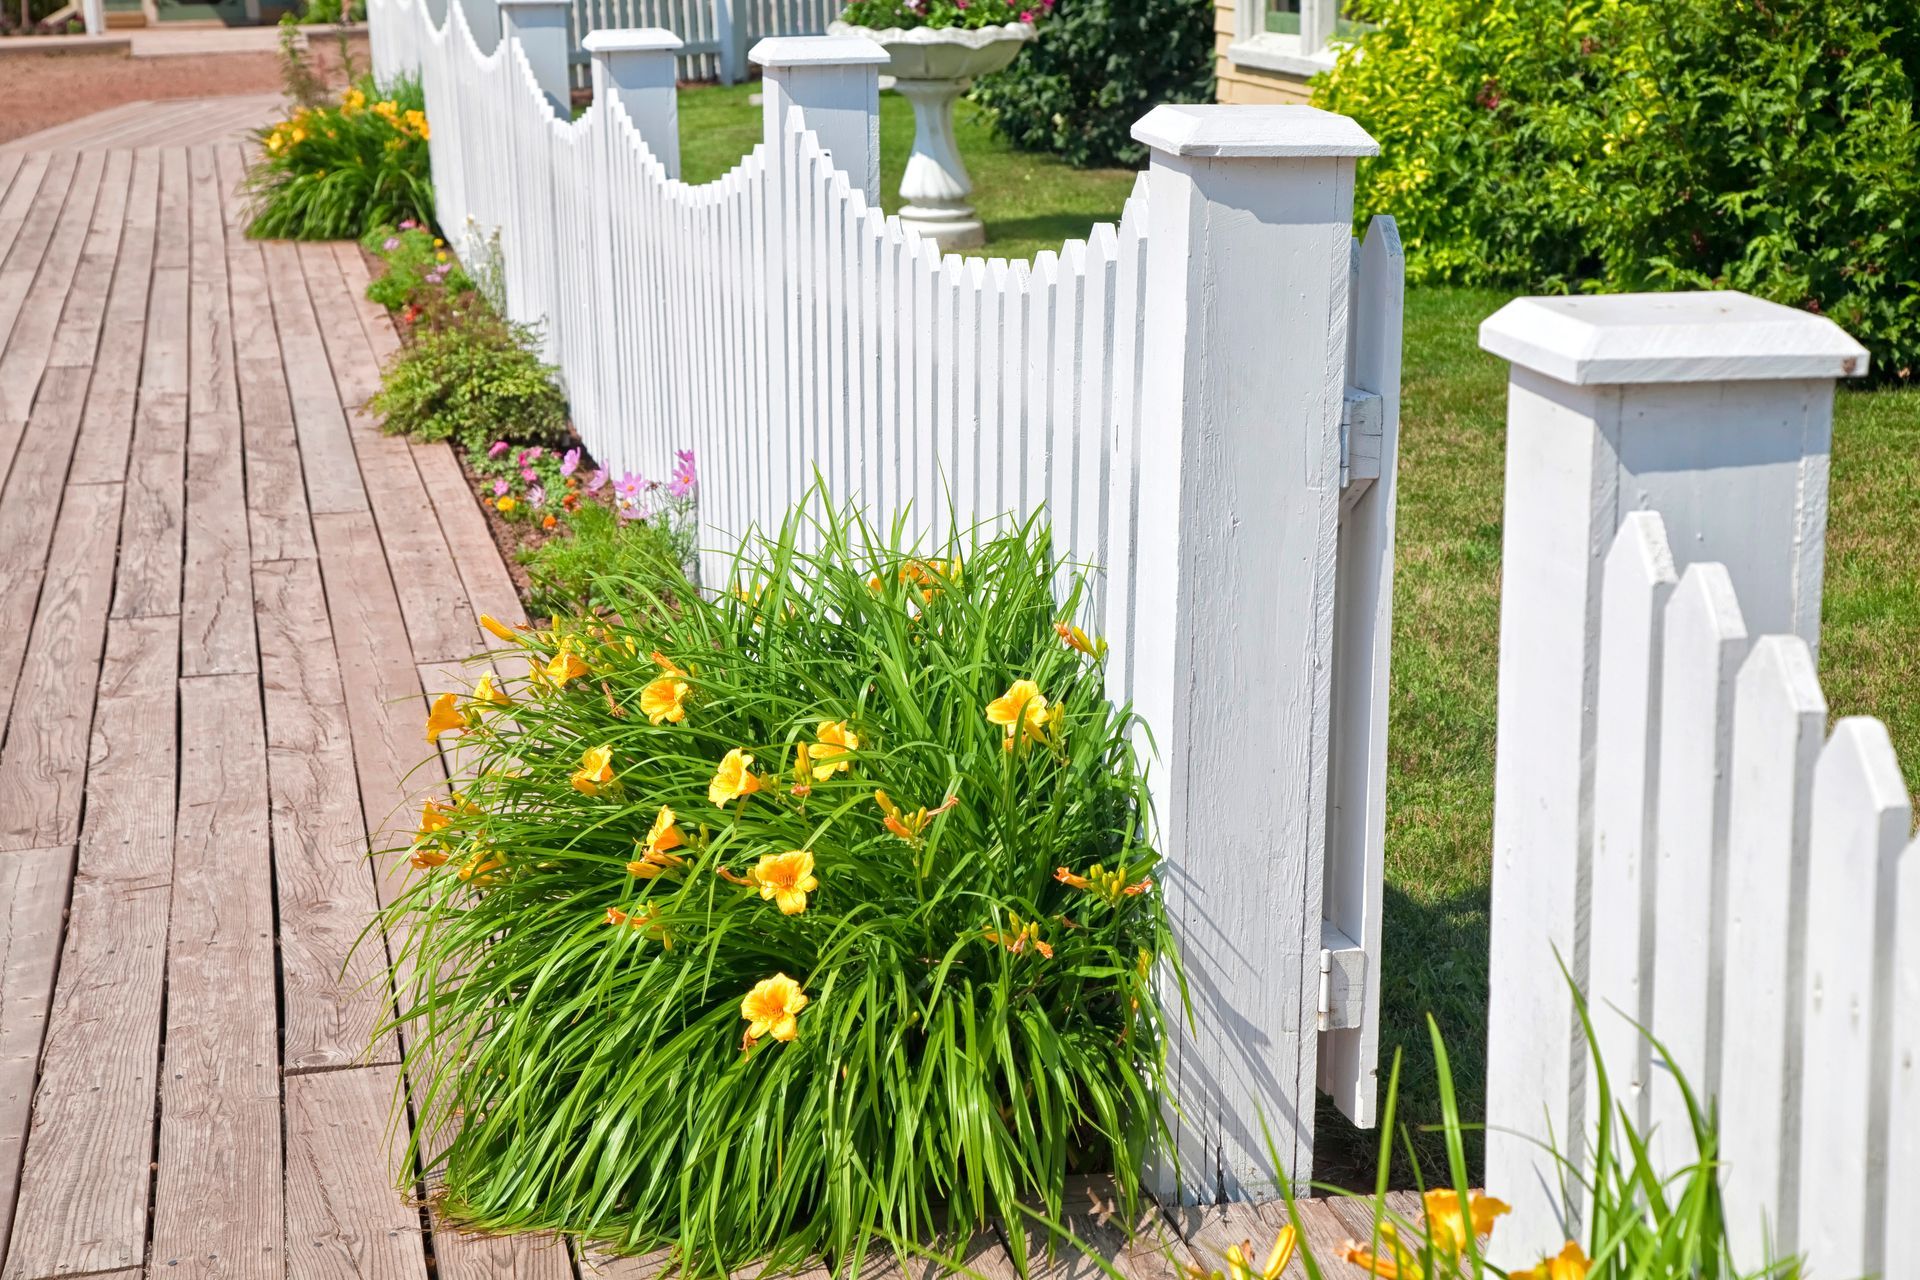 A pristine white picket fence surrounding a charming garden with colorful flowers in full bloom.